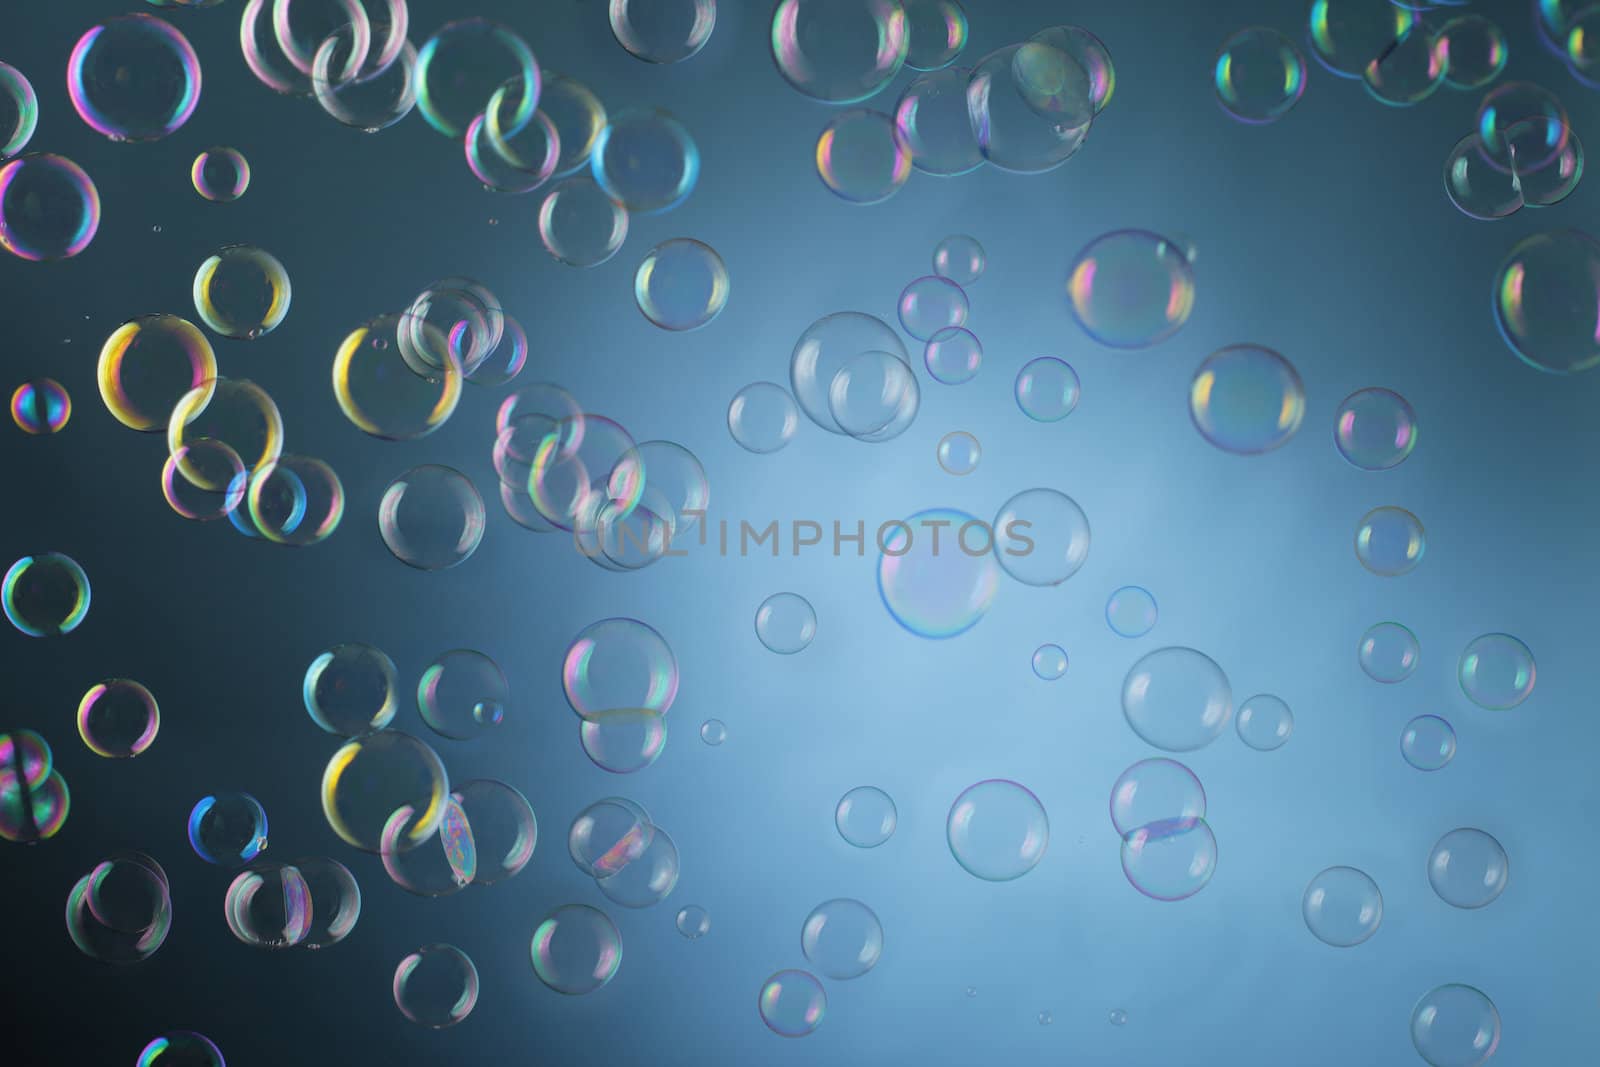 Real soap bubbles floating mid-air over blue background.